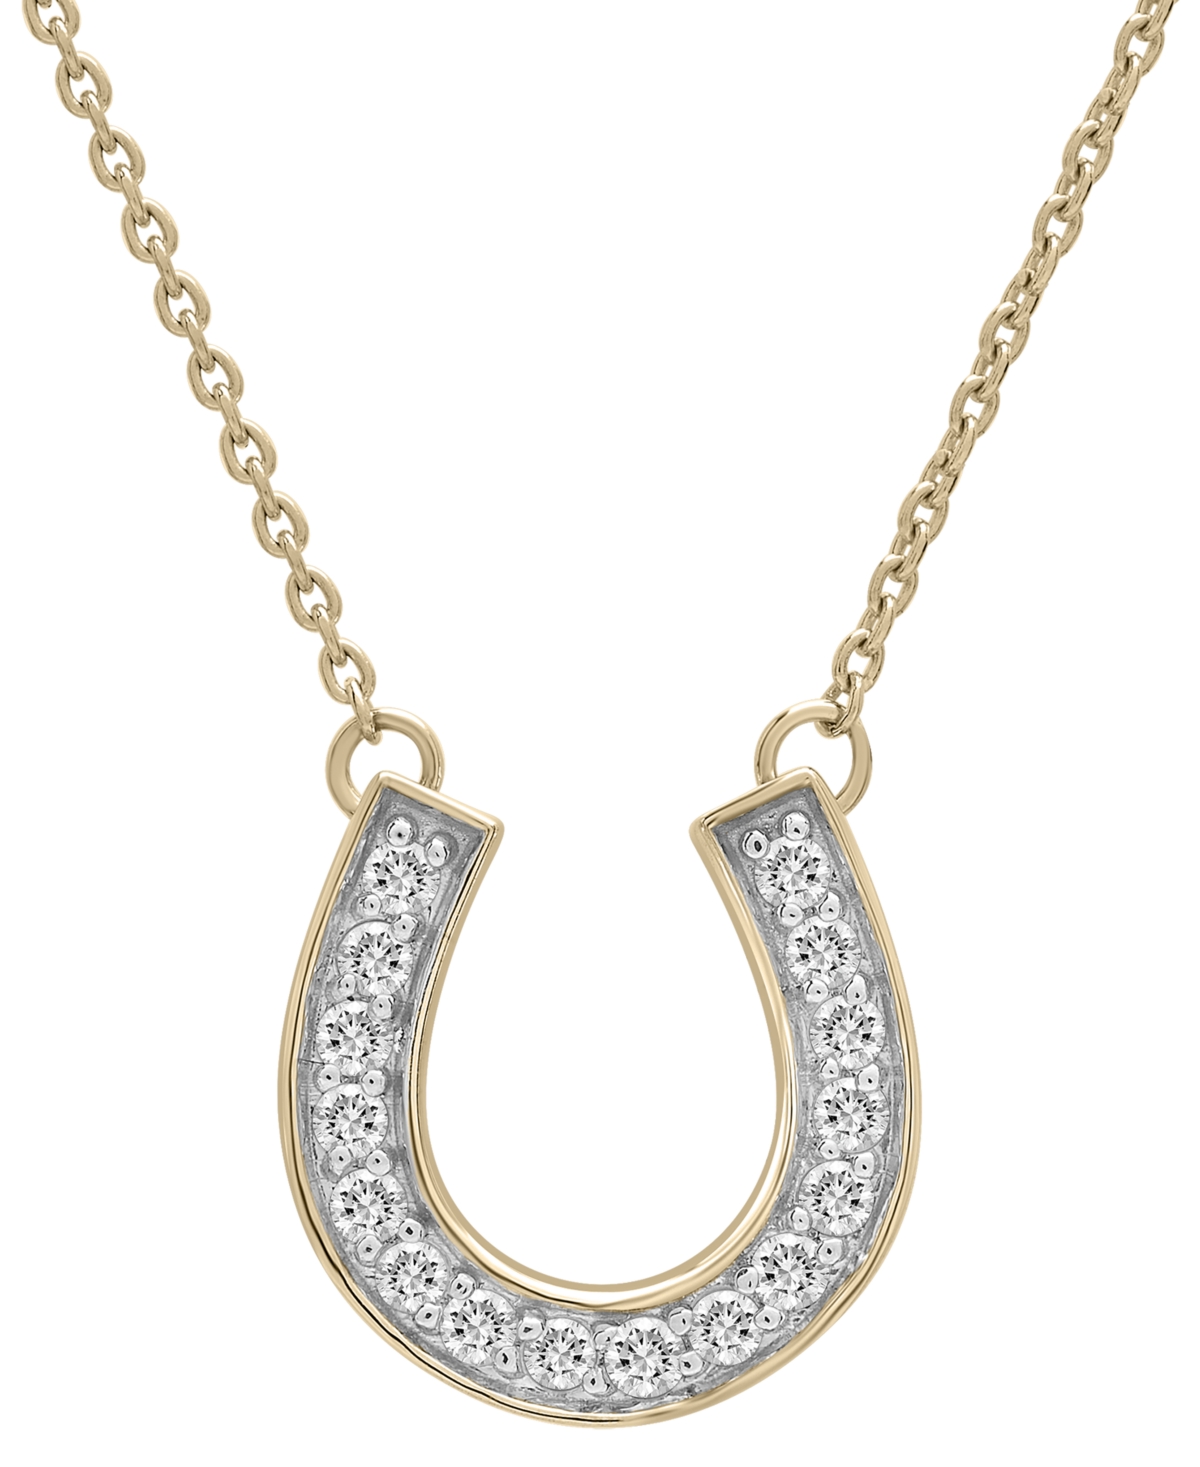 Wrapped Diamond Horseshoe Pendant Necklace (1/6 Ct. T.w.) In 14k White Or Yellow Gold, 17" + 2" Extender, Cr